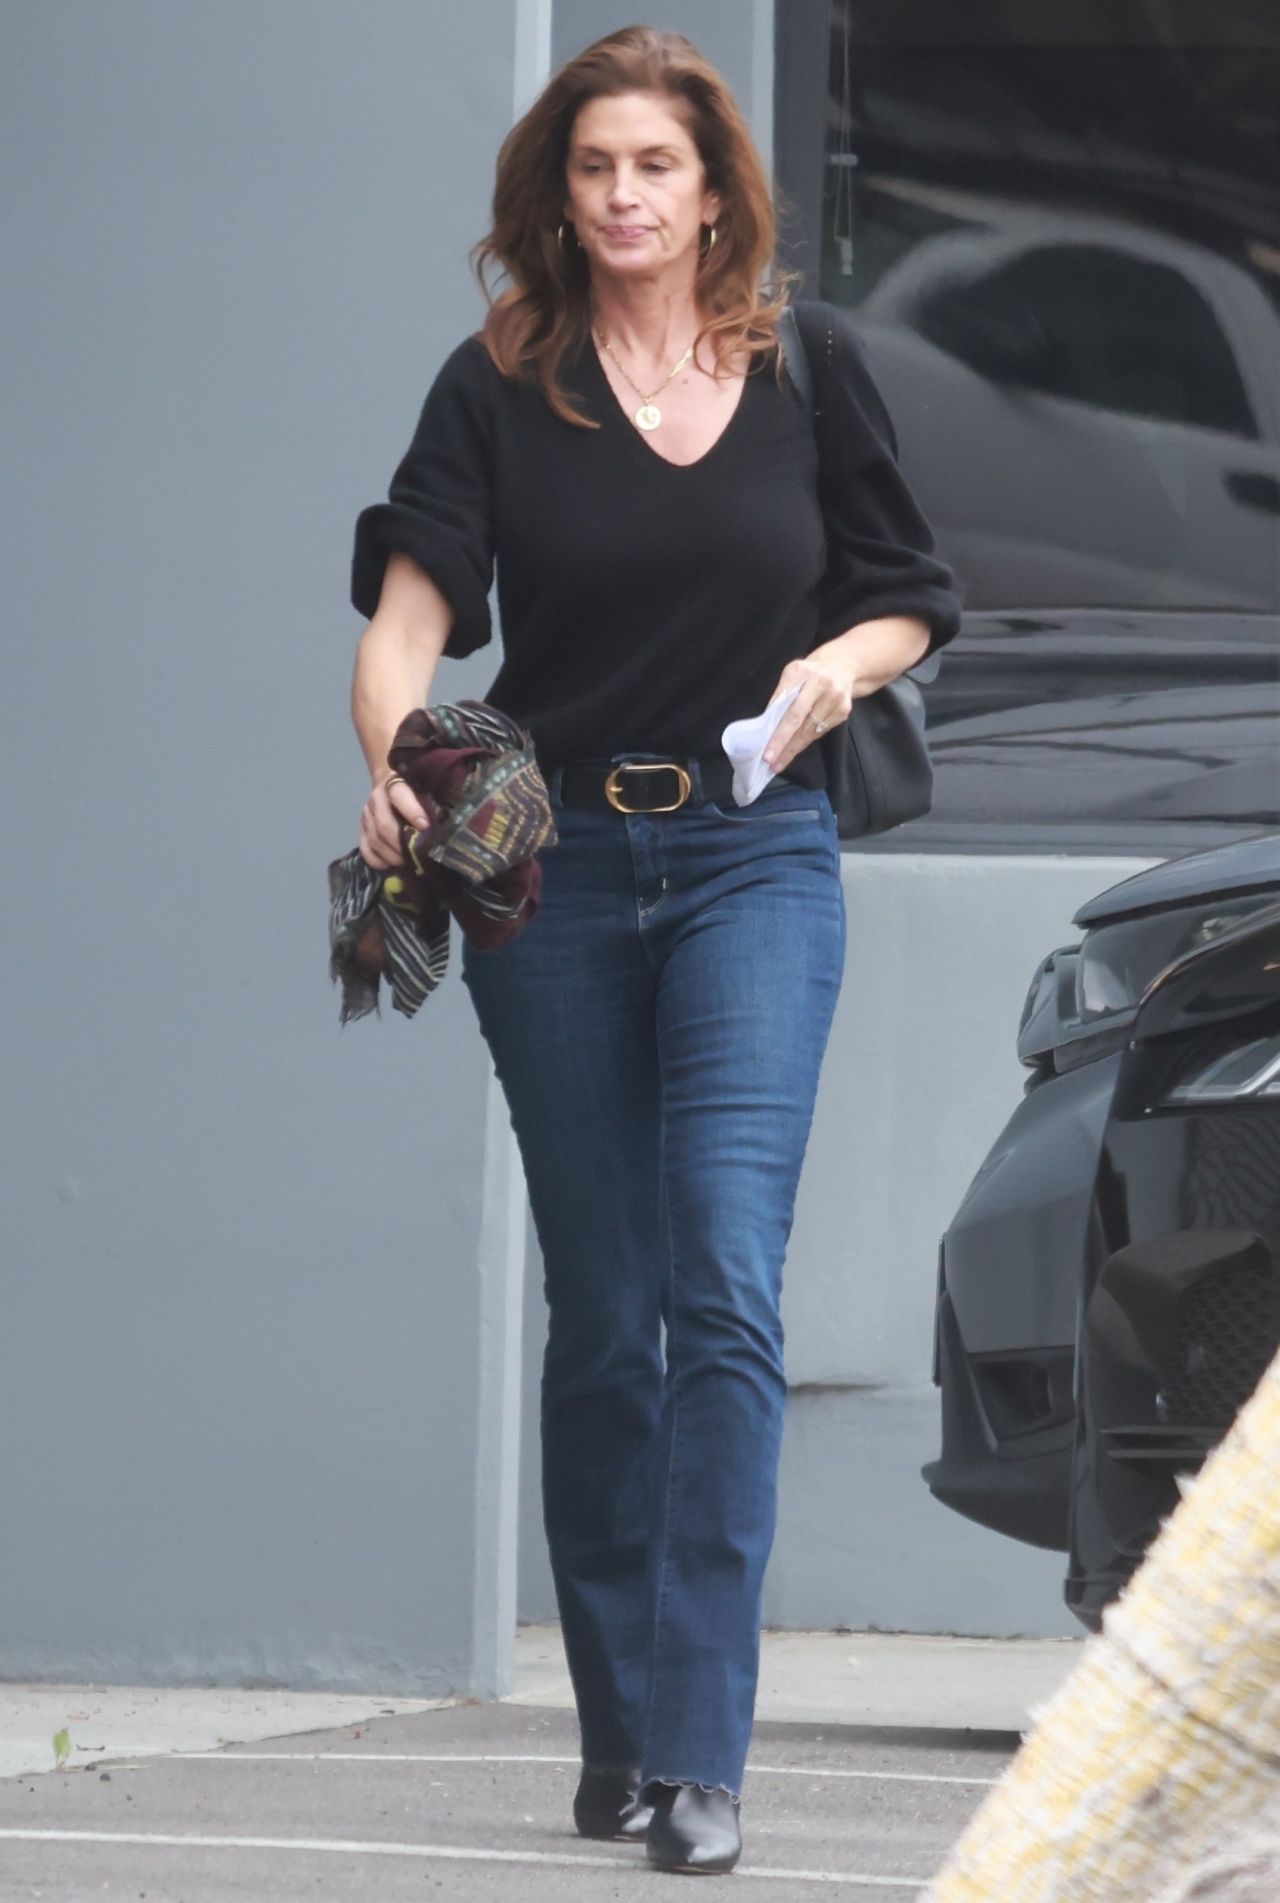 Cindy Crawford Arrives For a Photo Shoot at a Studio in Santa Monica